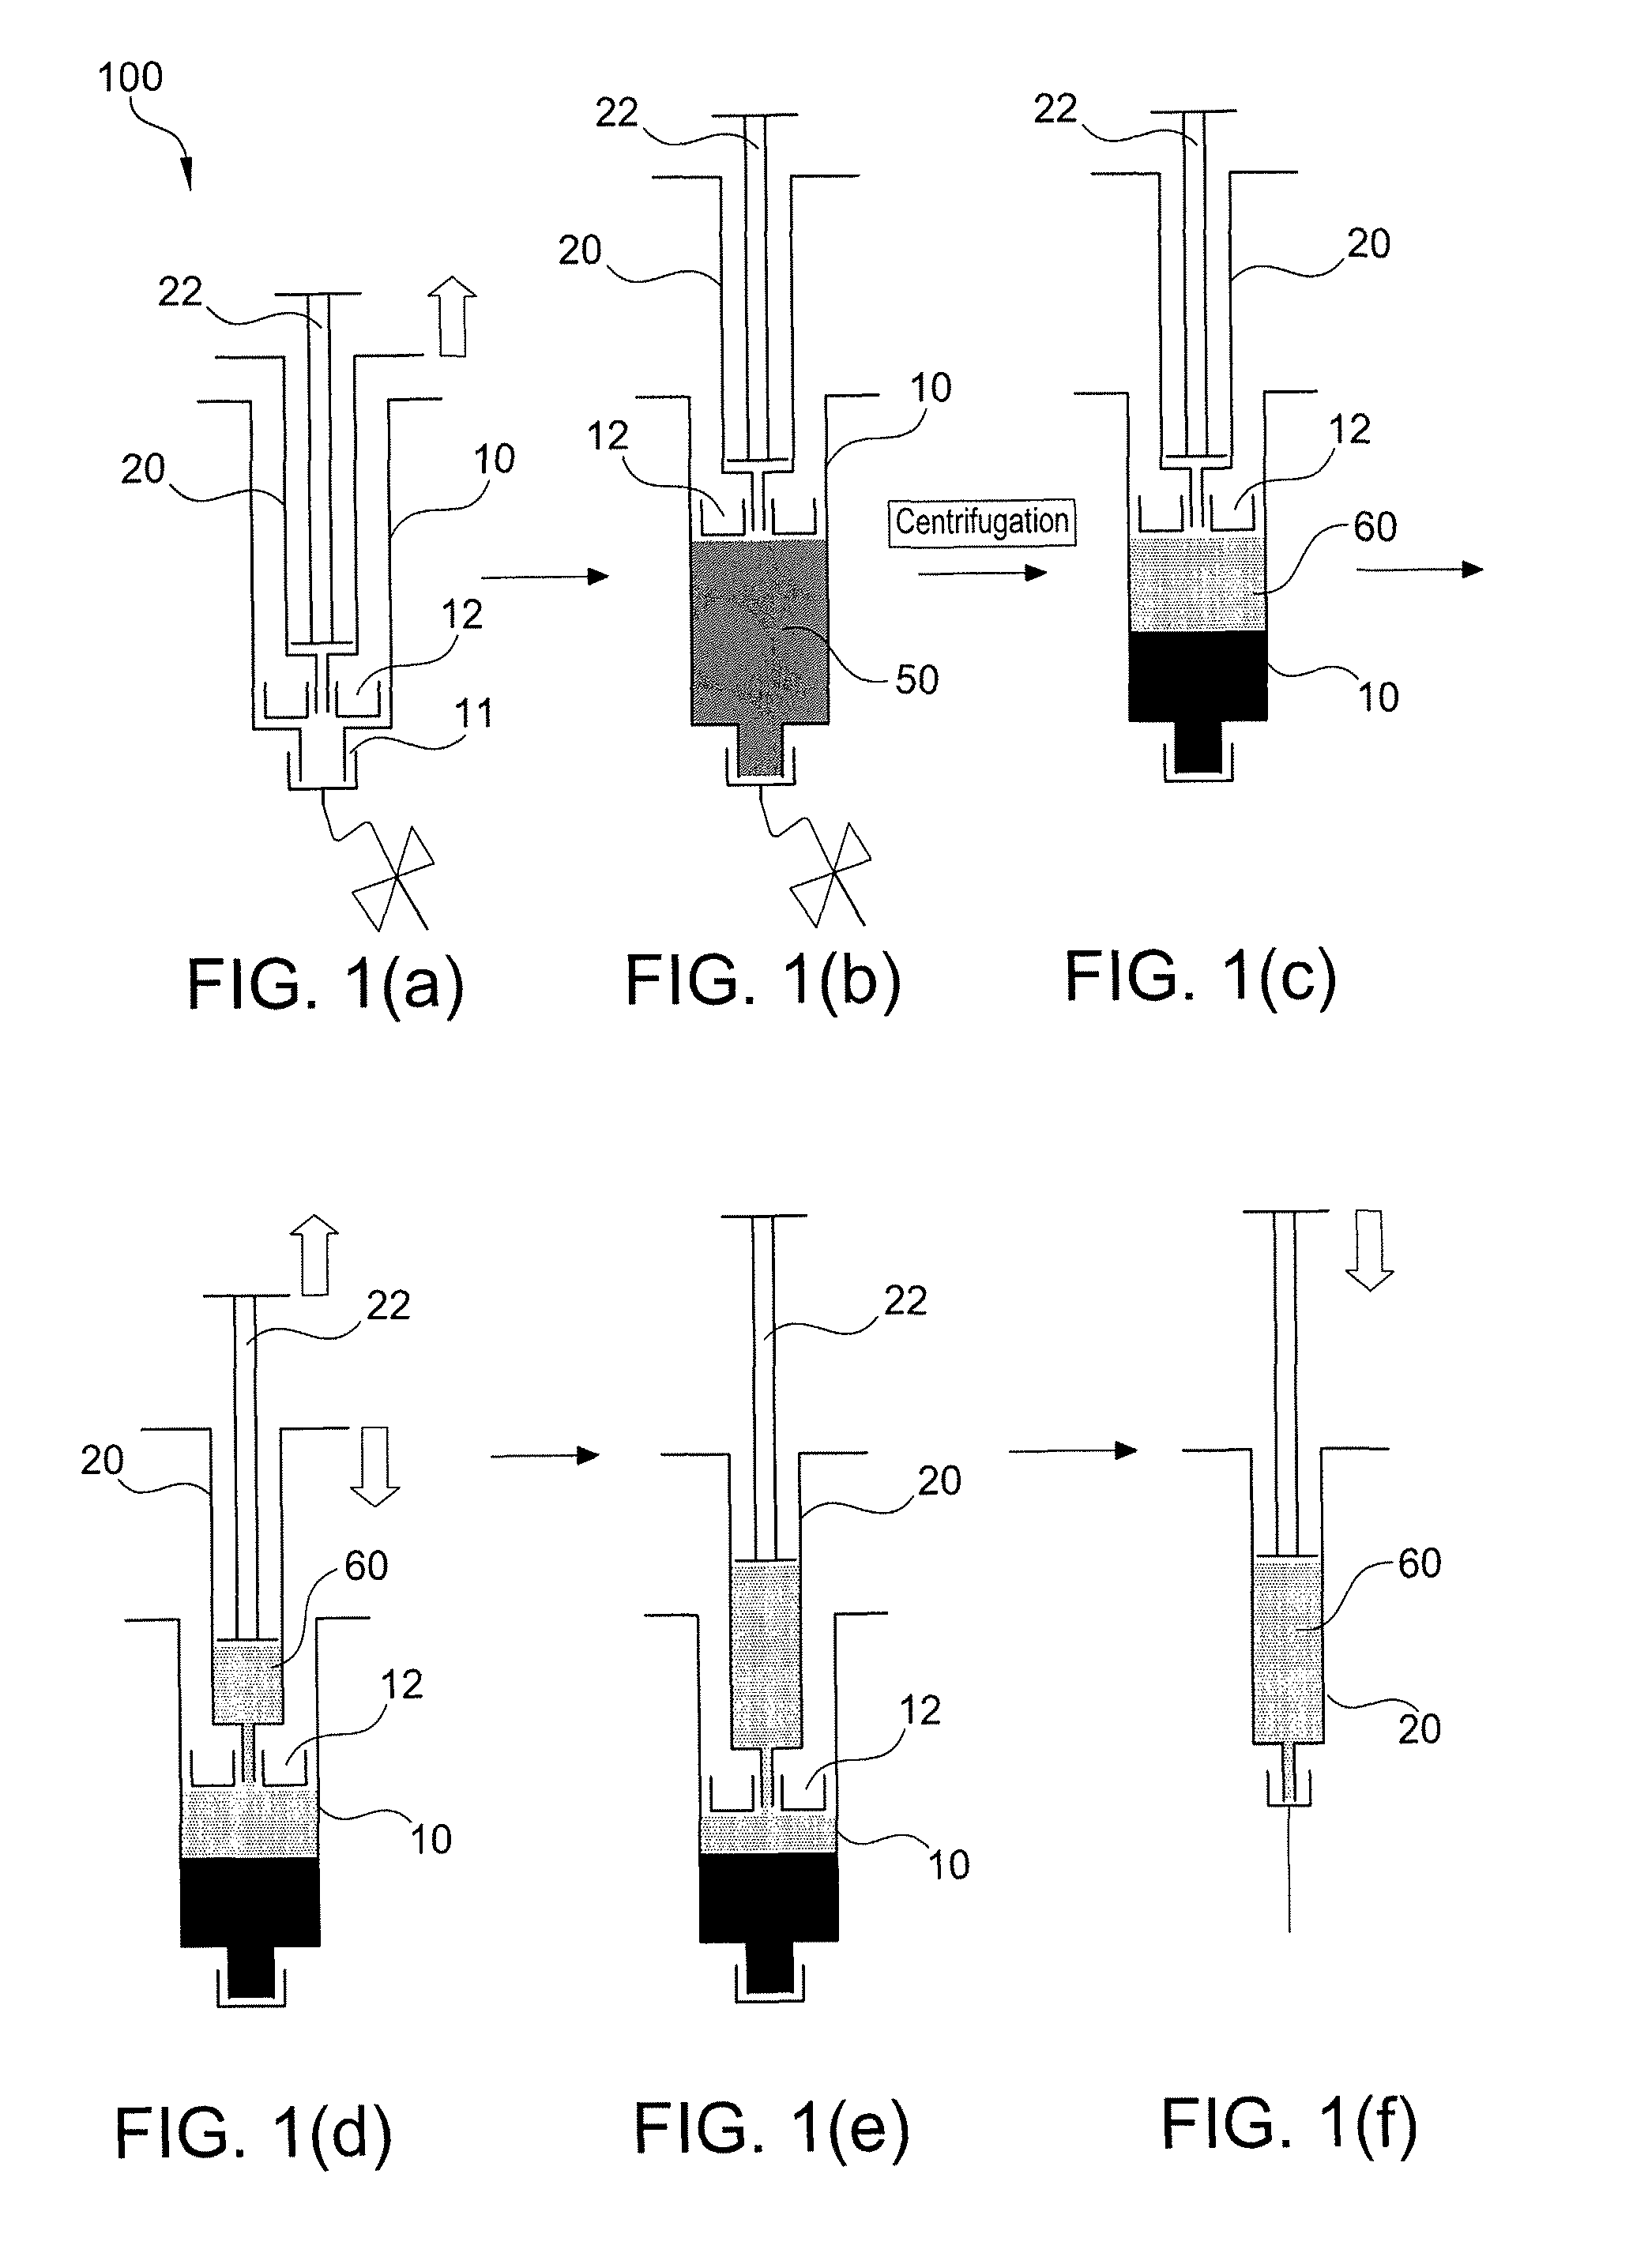 Method of making plasma enriched with platelets using a double syringe system where the second sytringe is within the first syringe and use thereof